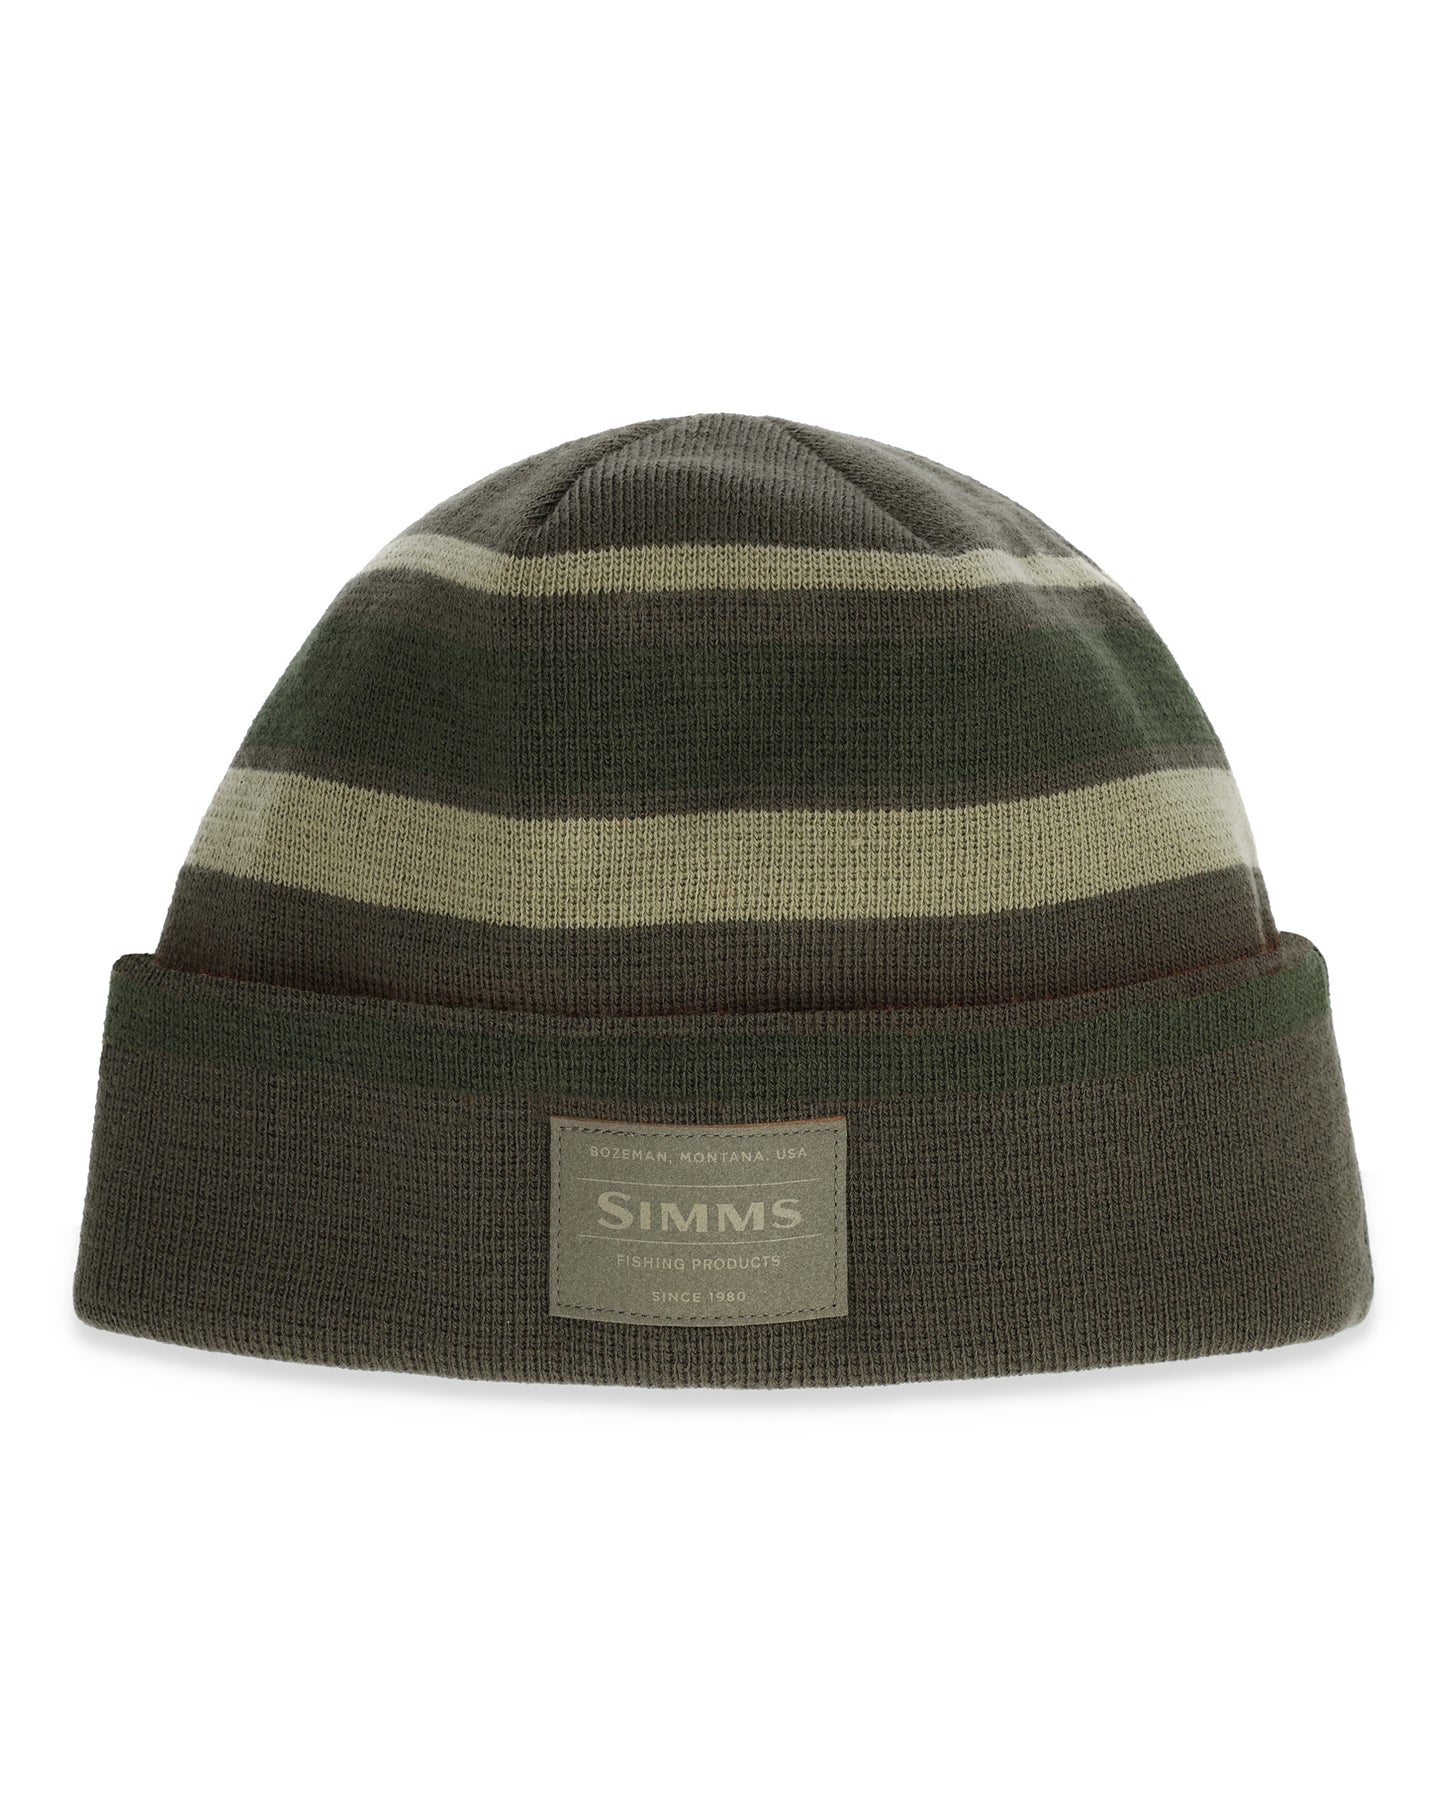 13805-781-Windstopper-Beanie-Tabletop-F23-front